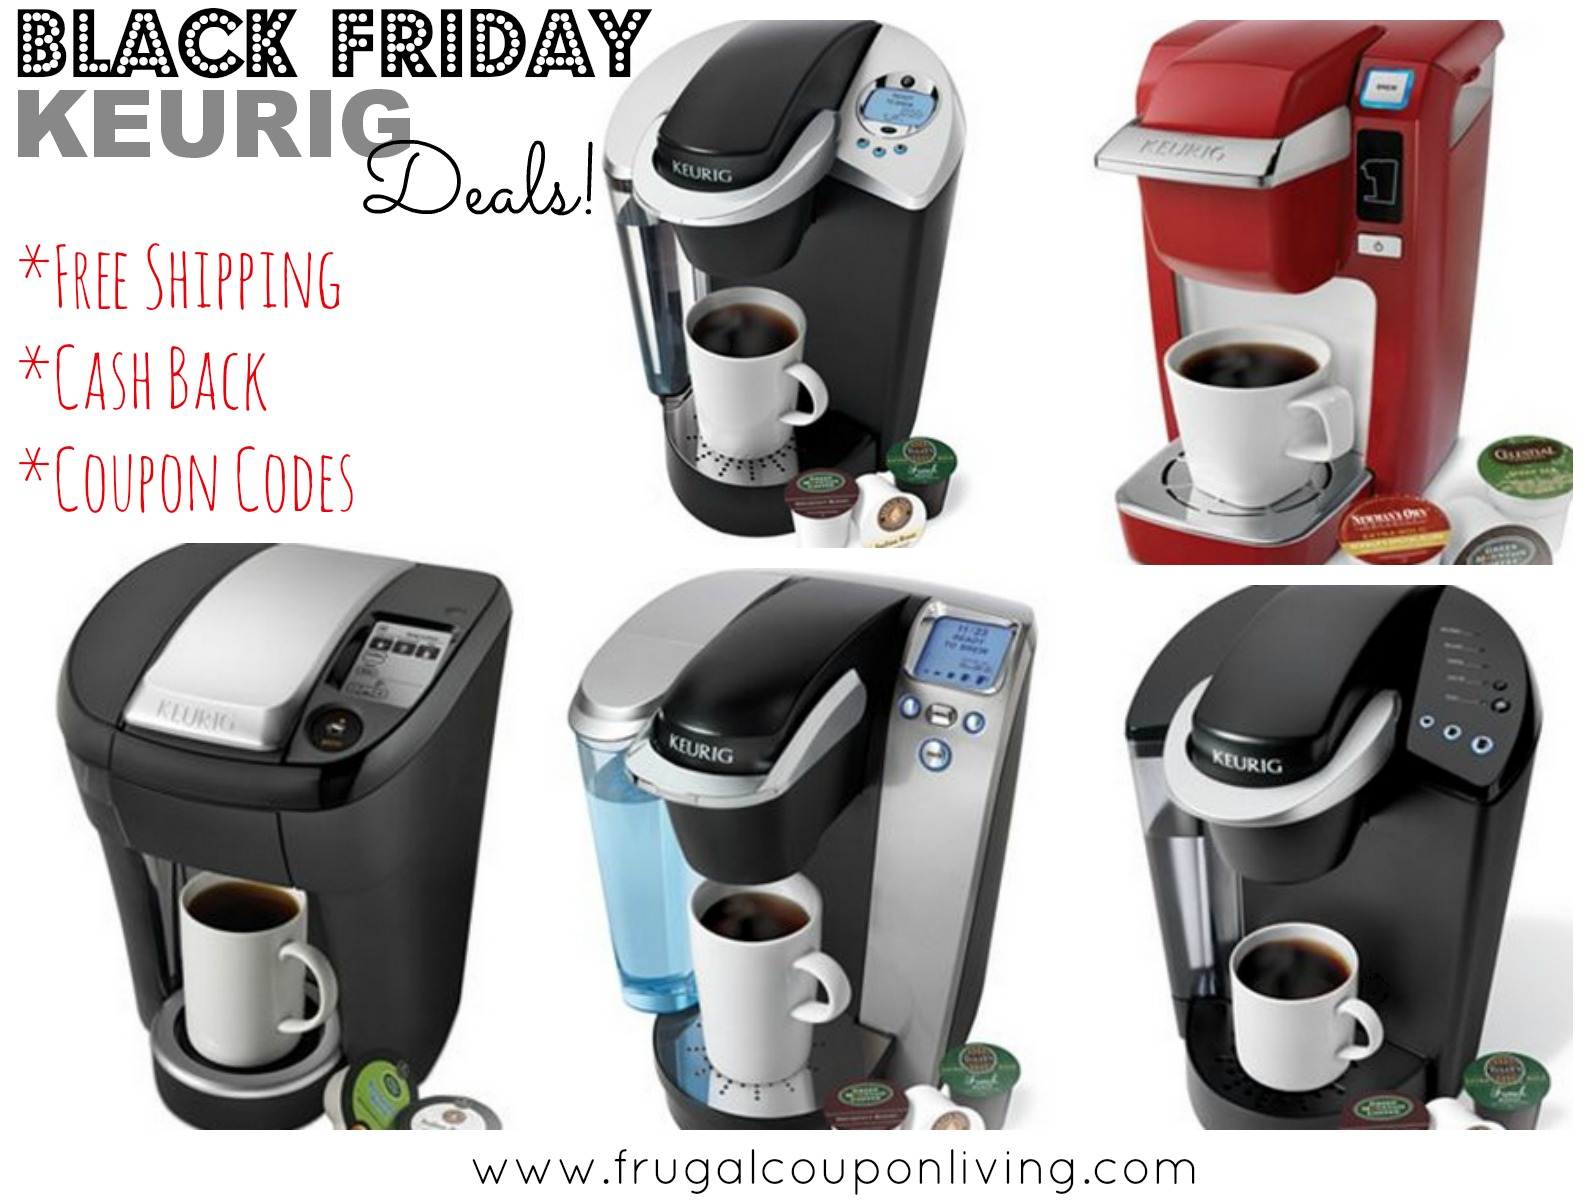 Keurig Black Friday Sale from 69.99 Cash Back and